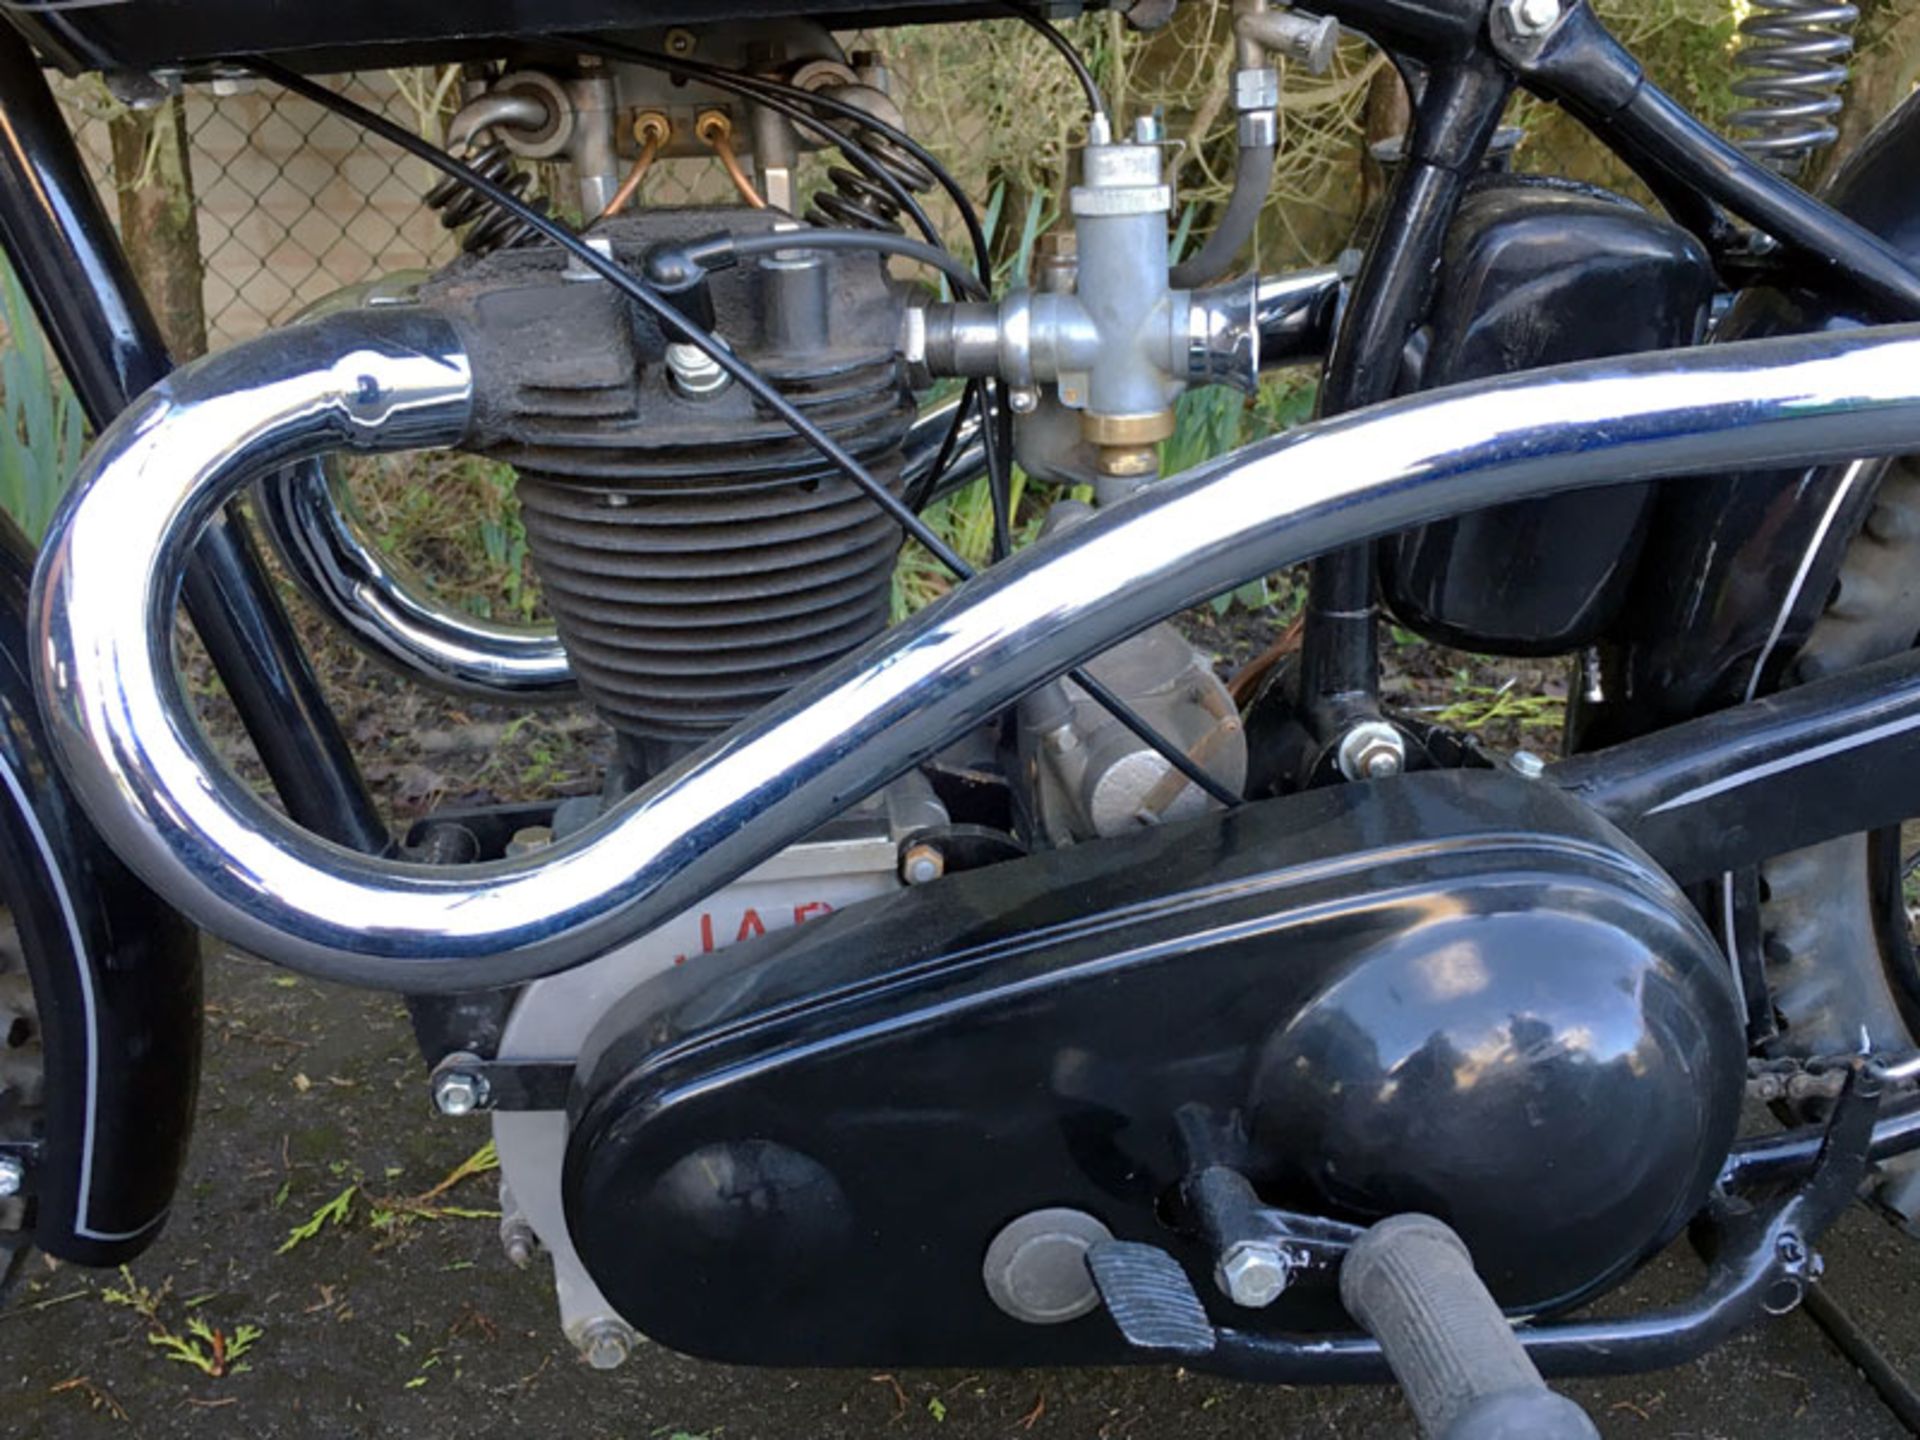 1939 Royal Enfield Special - Image 4 of 6